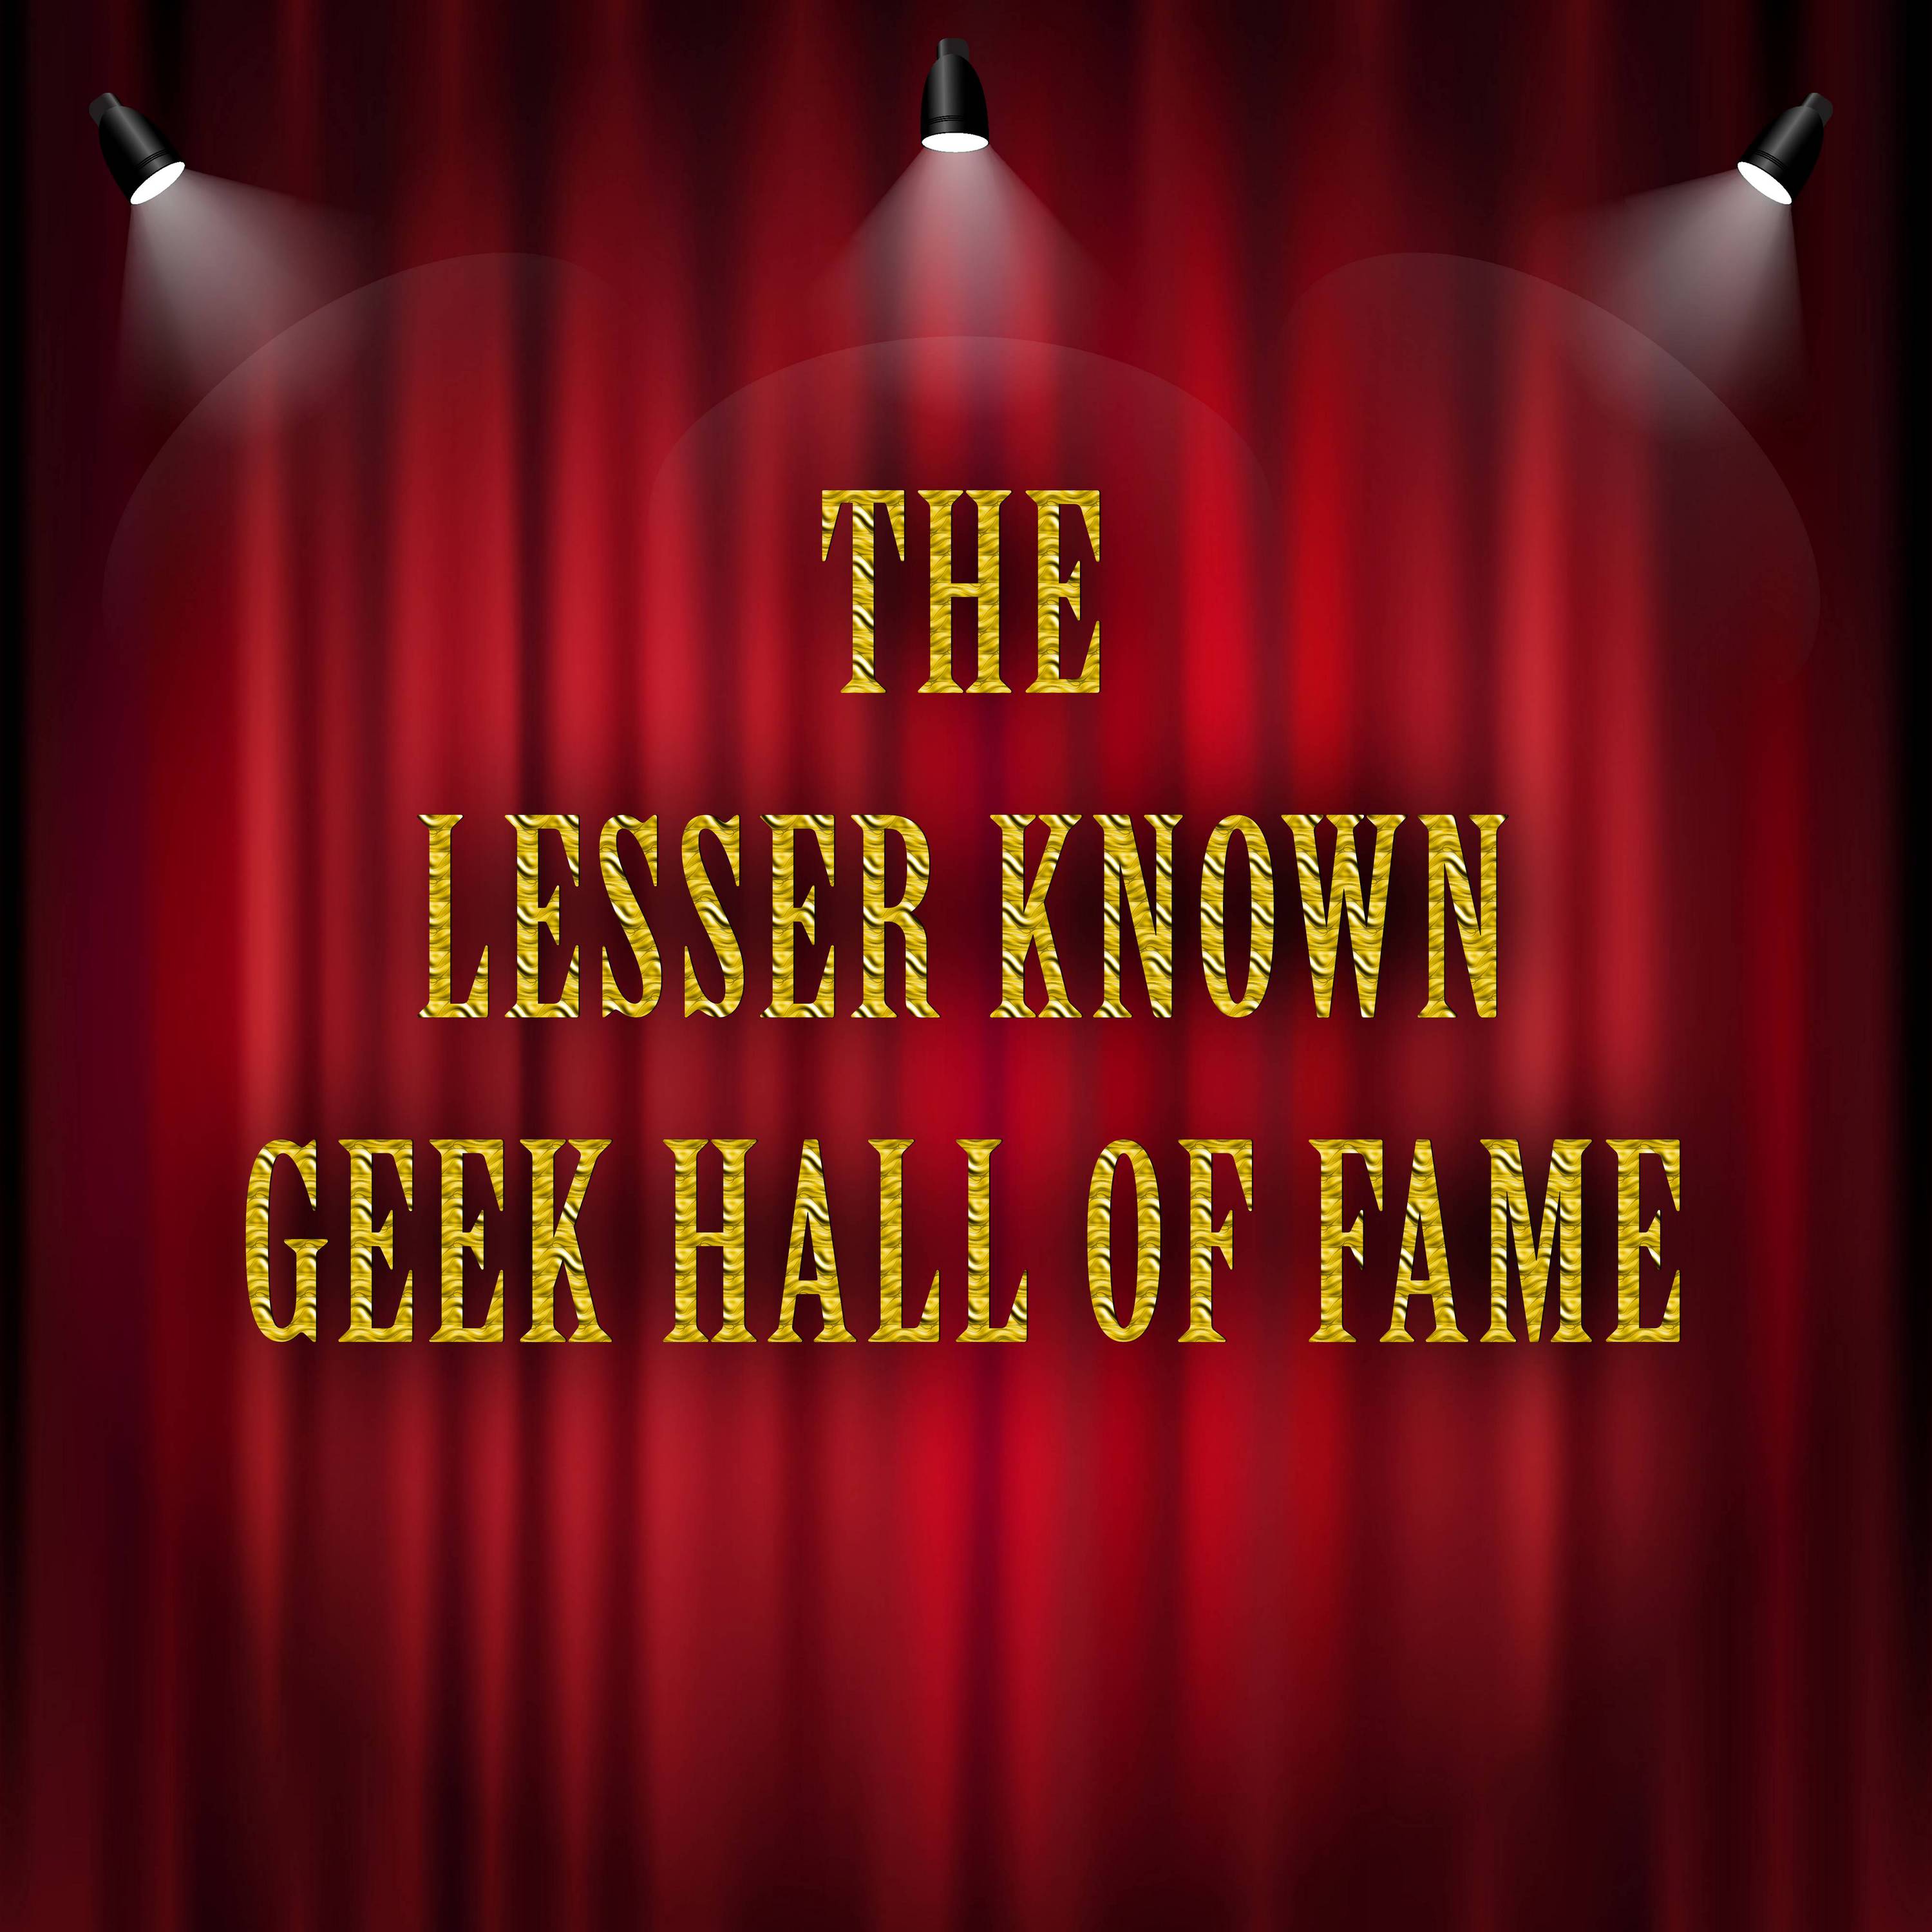 The Lesser Known Geek Hall Of Fame